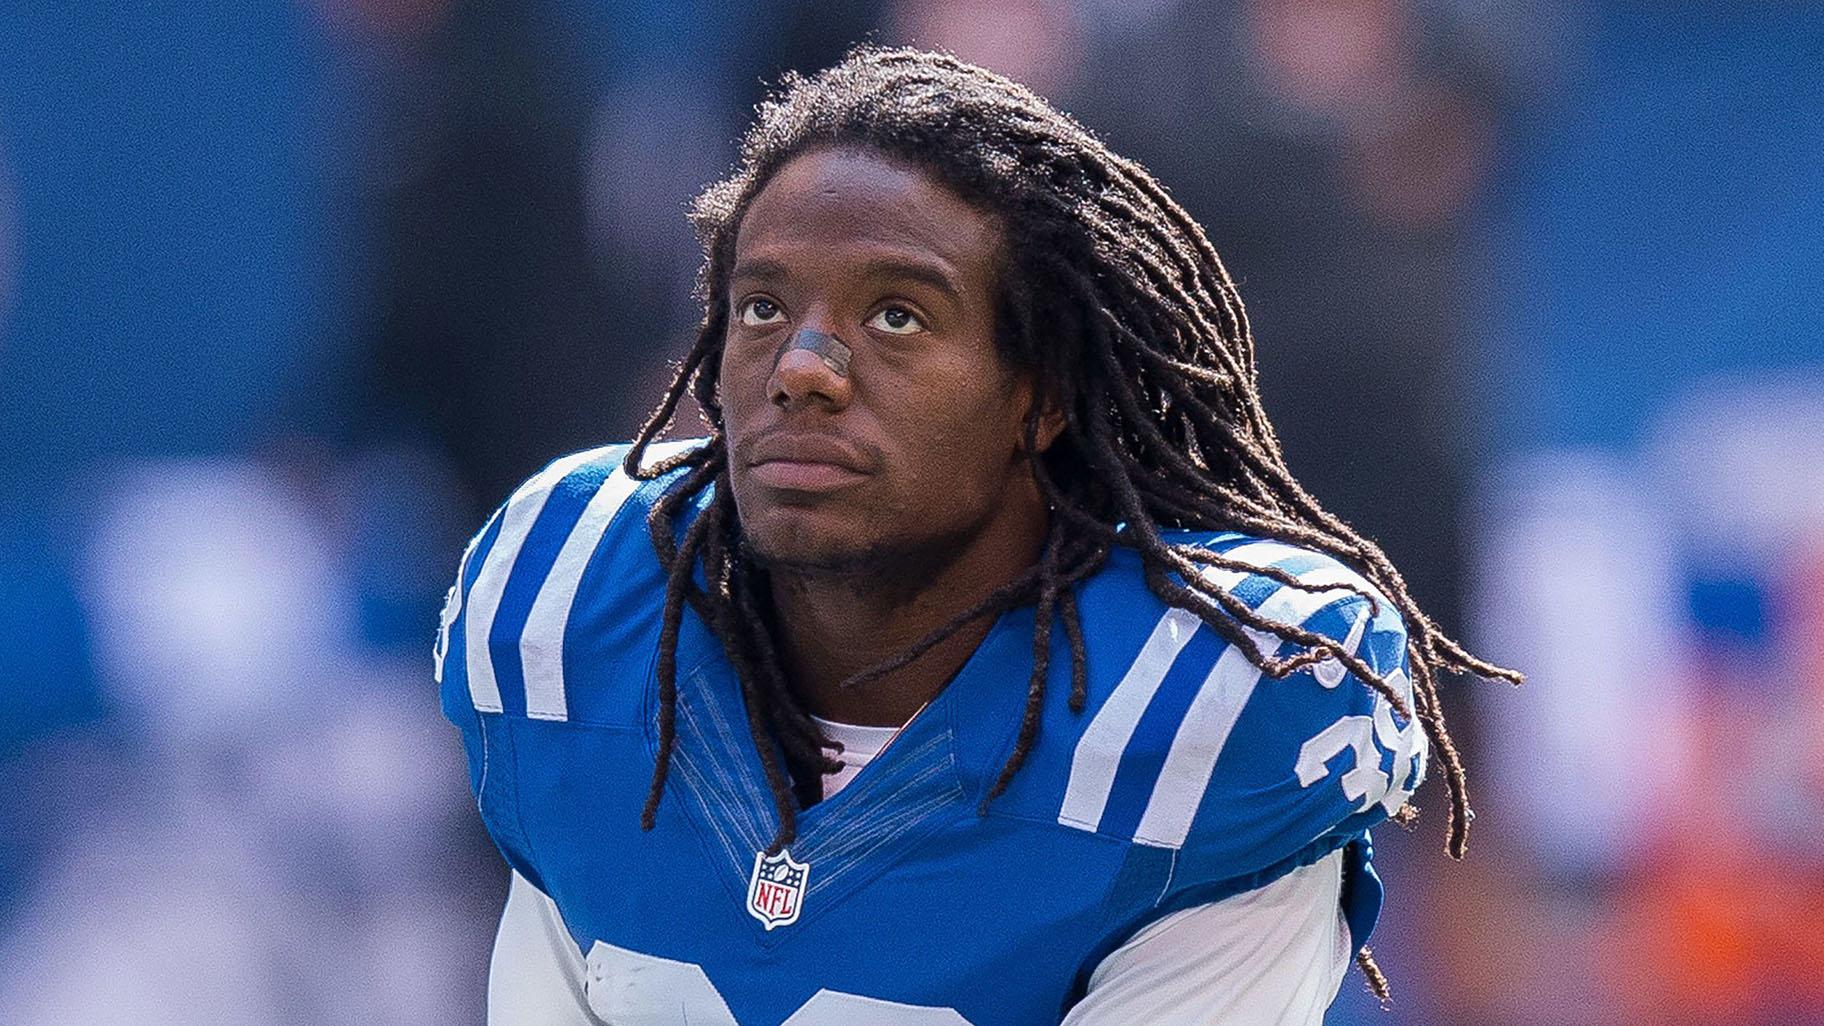 Former NFL player Sergio Brown is pictured on Oct. 19, 2014. (Zach Bolinger / Icon Sportswire / Corbis / Getty Images)